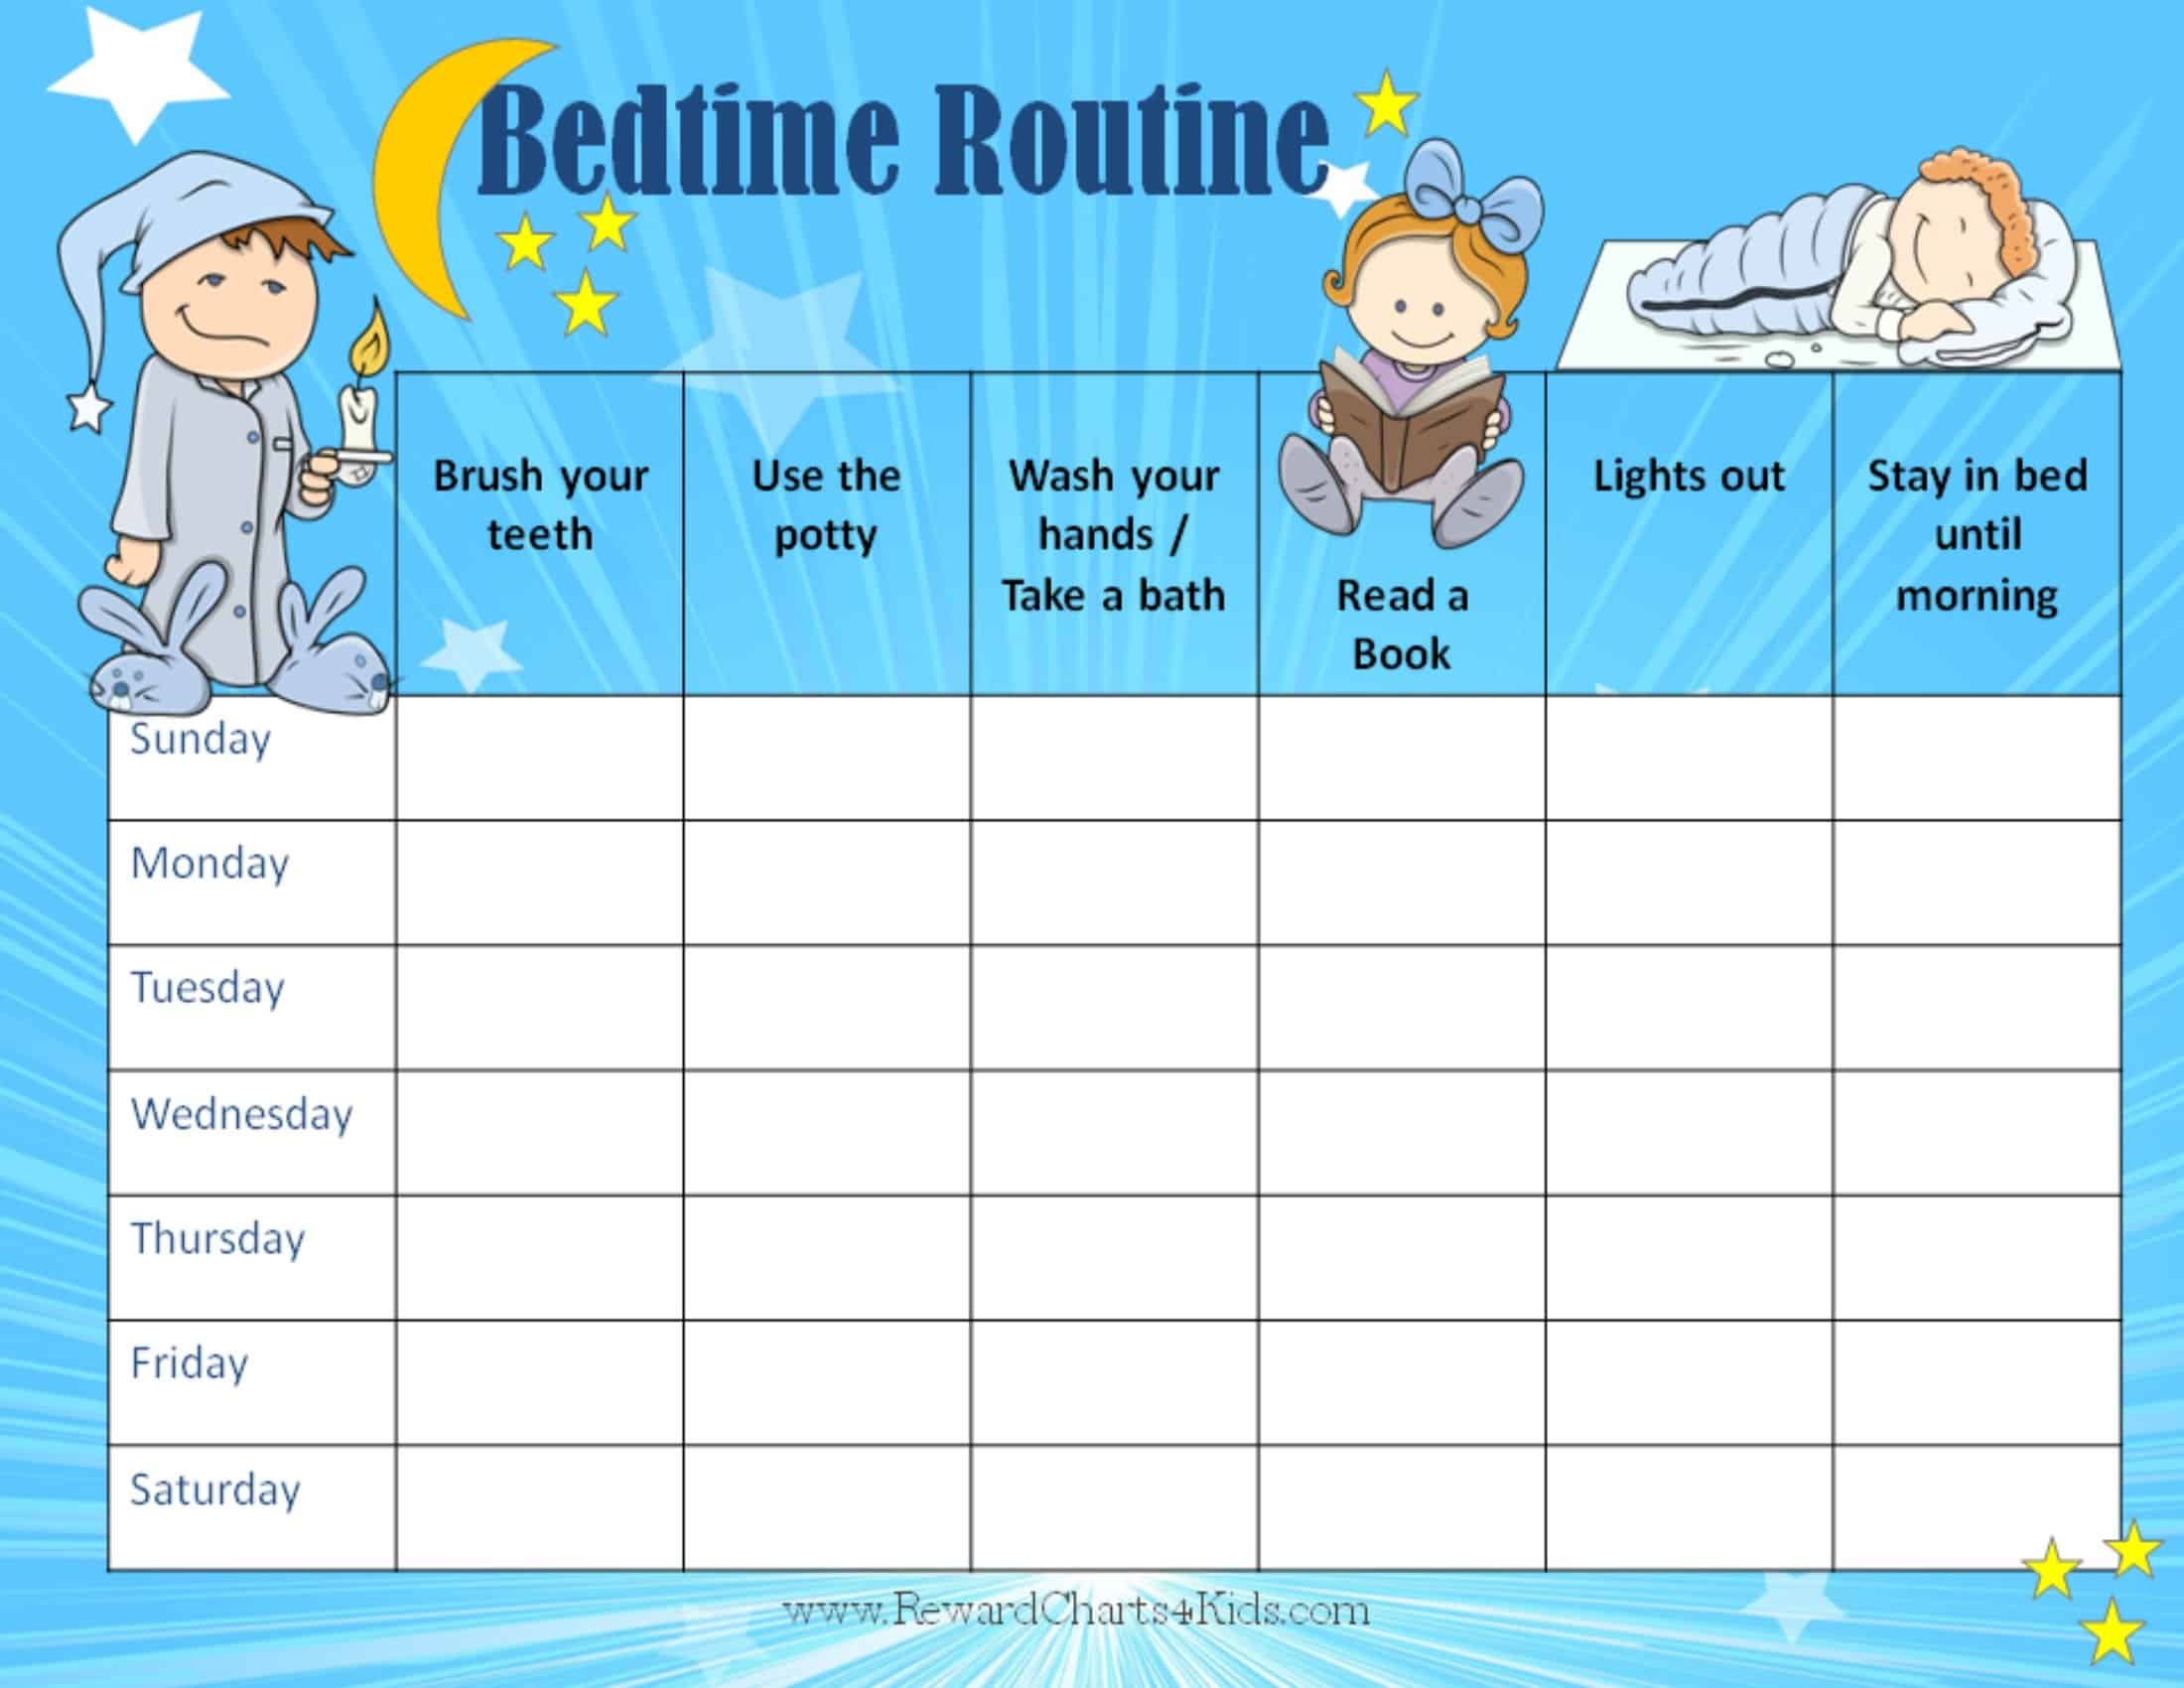 free-printable-bedtime-routine-chart-customize-online-then-print